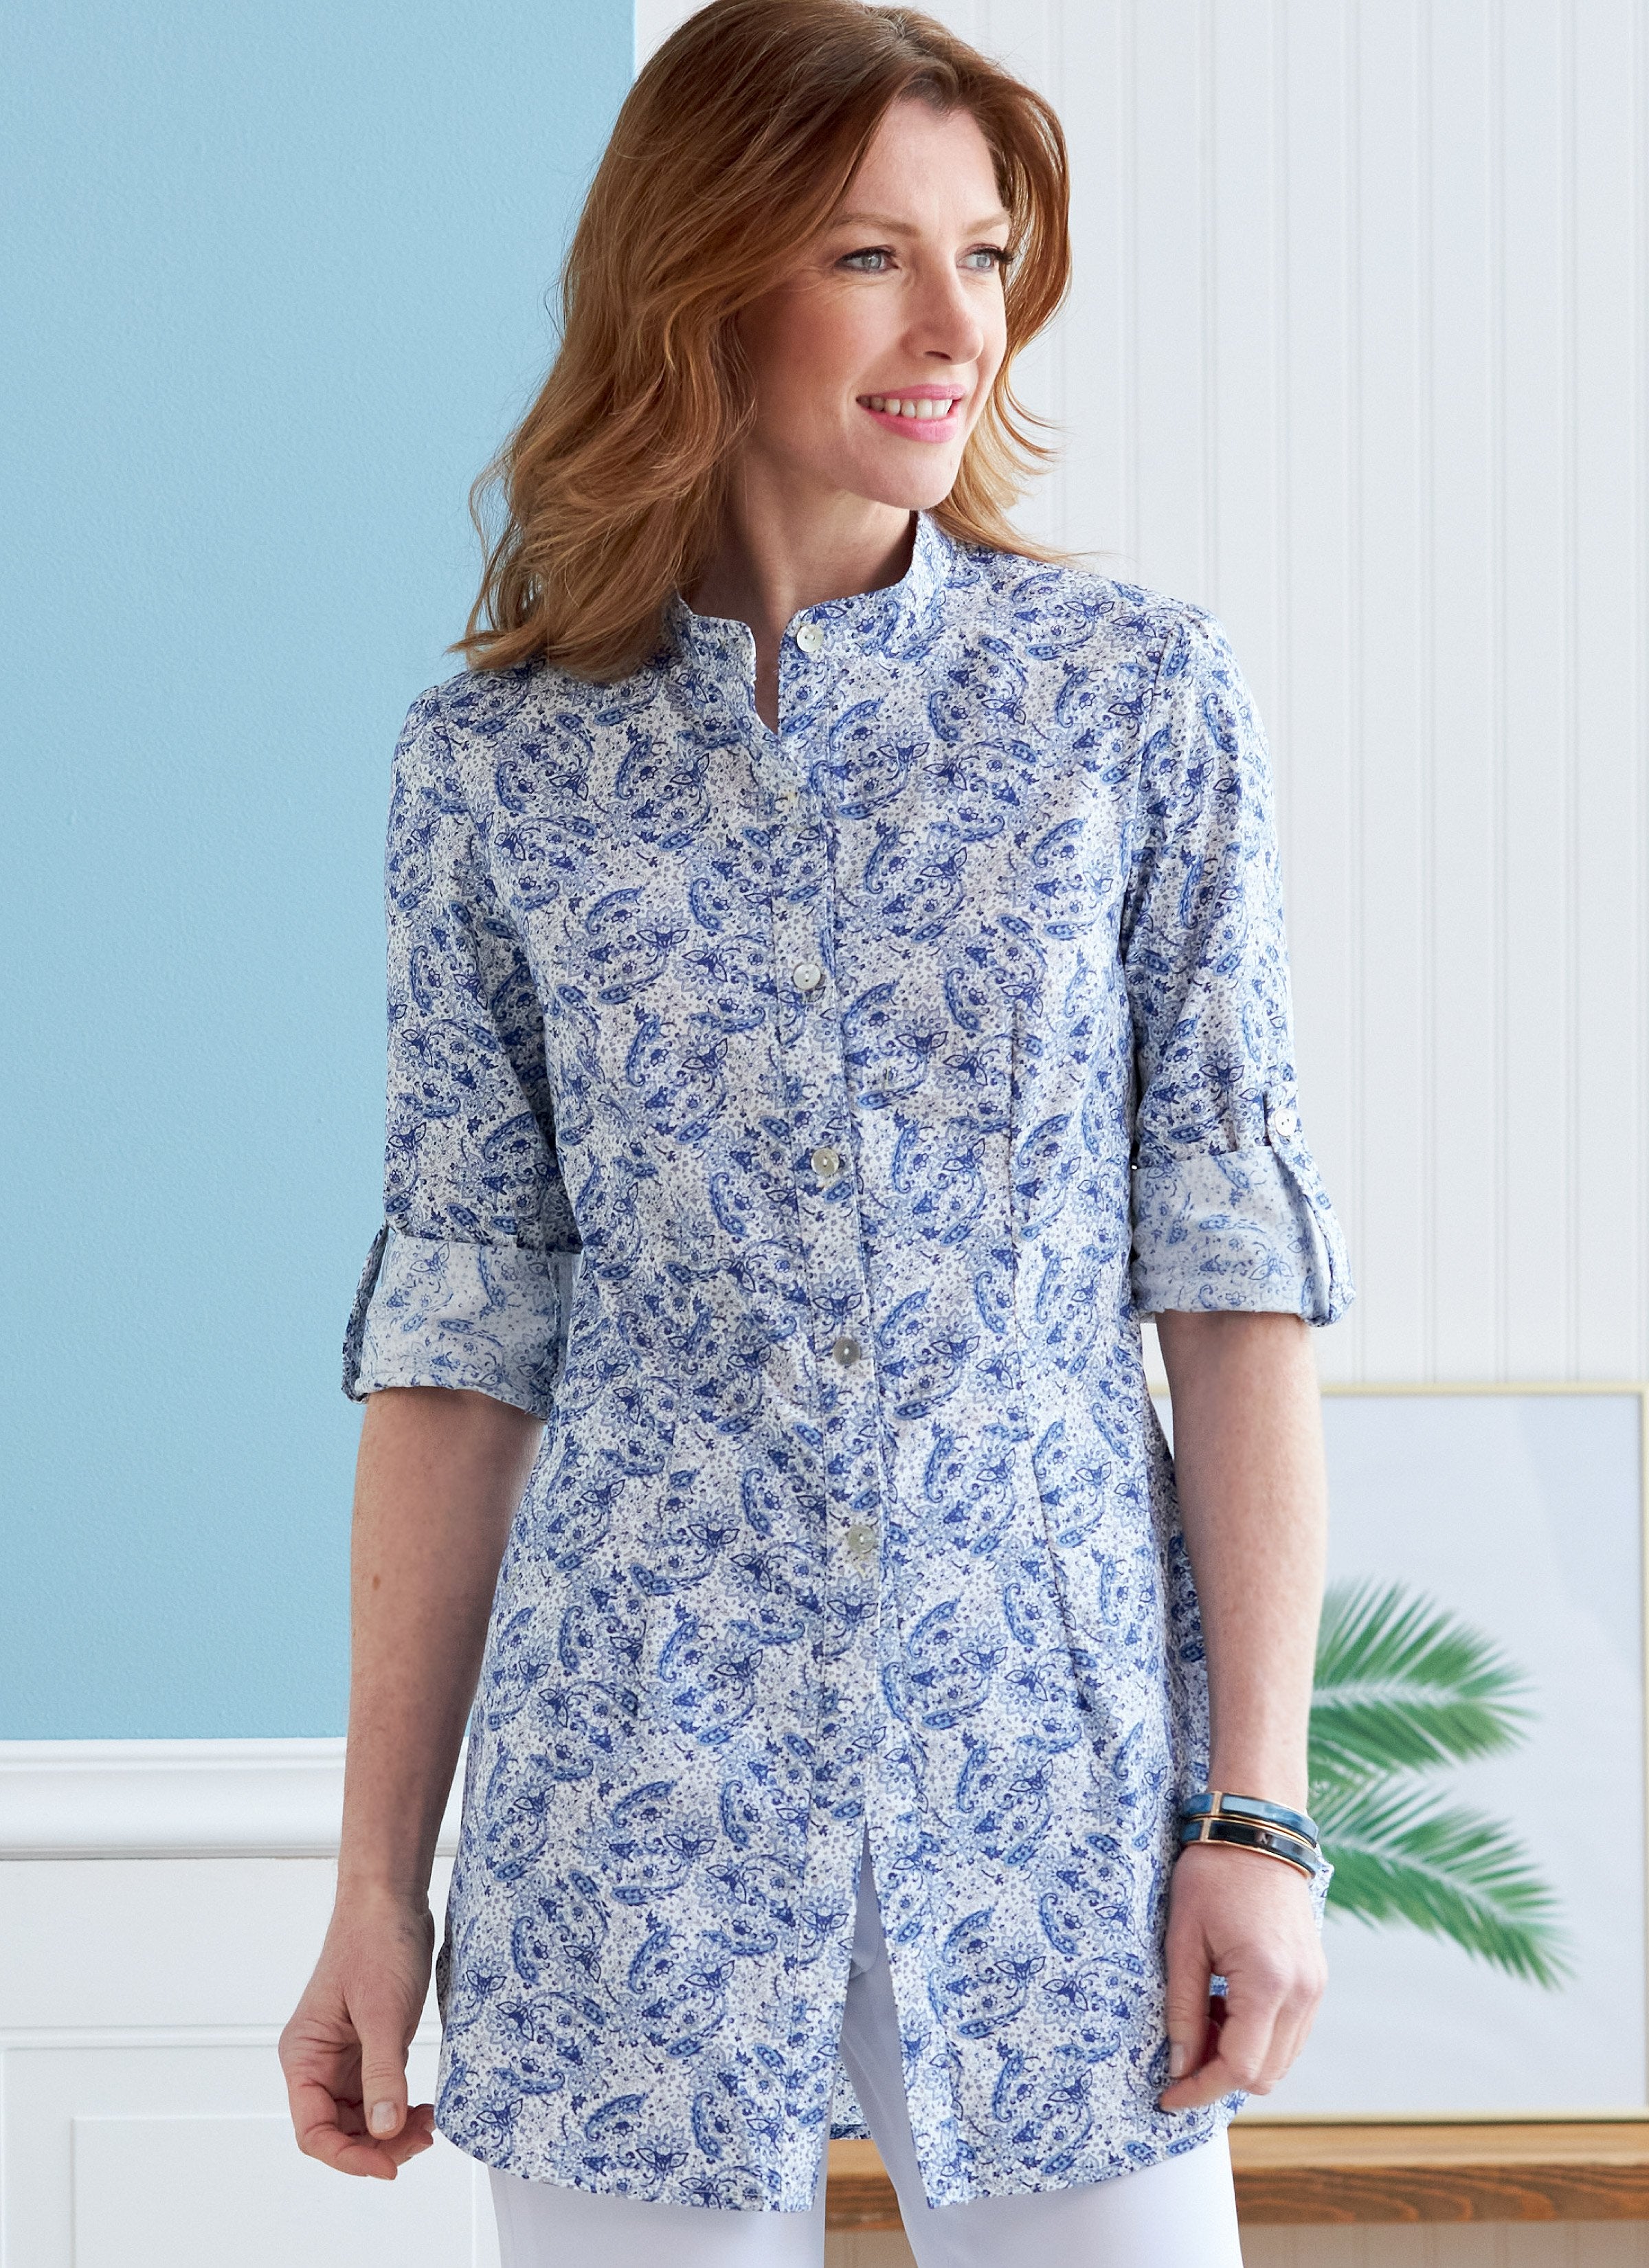 Butterick sewing pattern 6852 Misses' Button-Down Shirts from Jaycotts Sewing Supplies